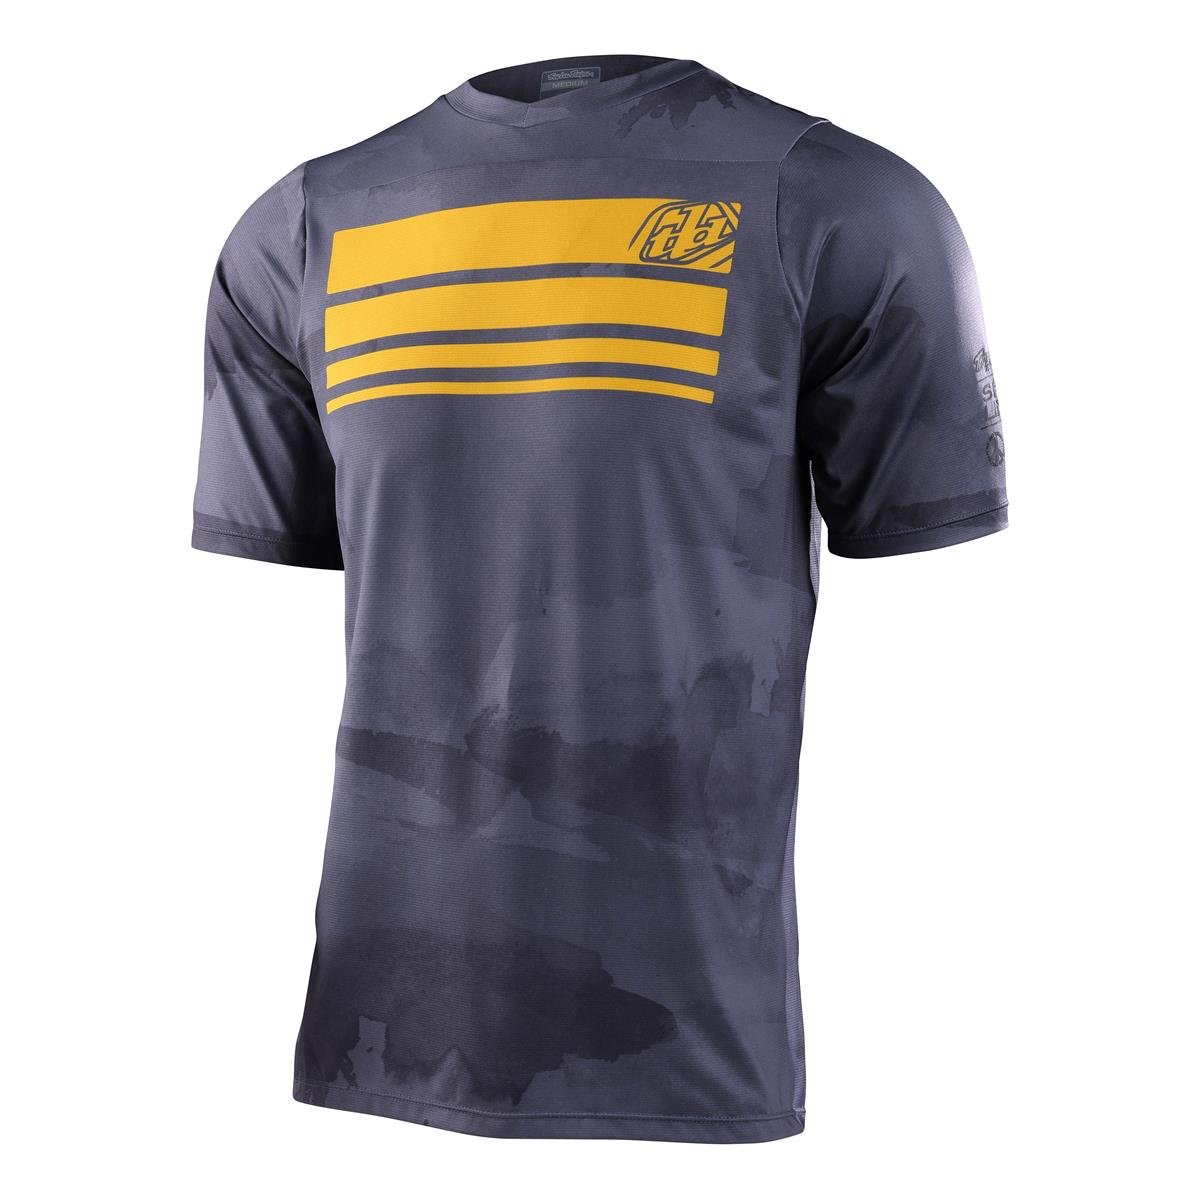 Troy Lee Designs Maillot VTT manches courtes Skyline Blocks - Charcoal